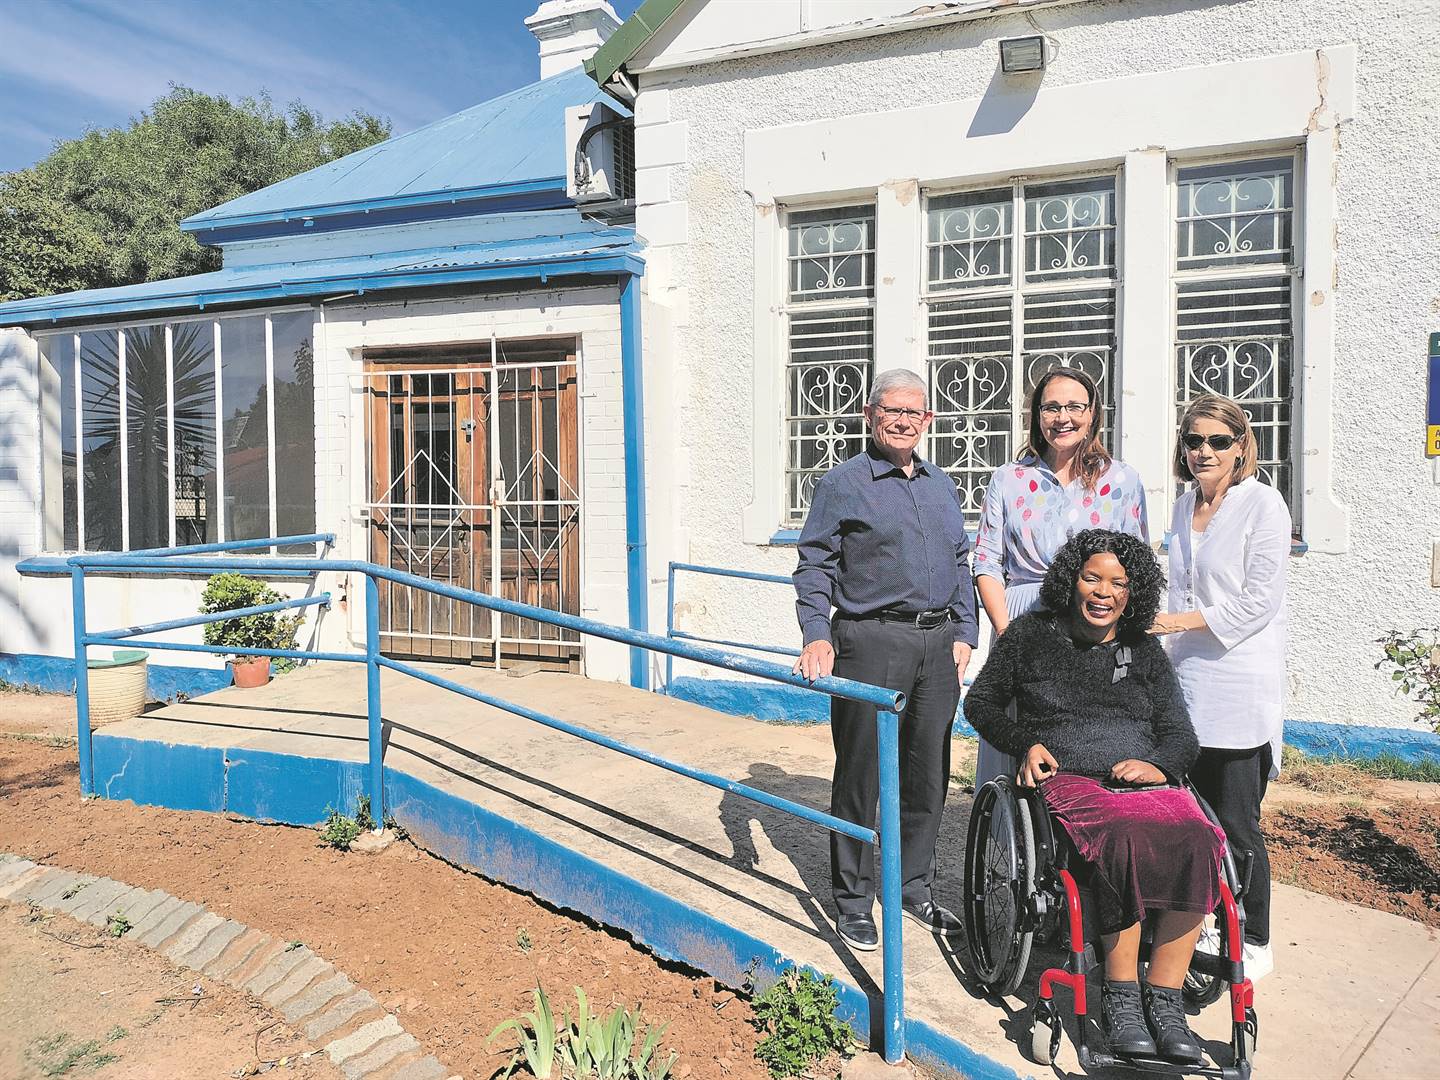 The building on the premises of the Association for People with Disabilities (APD) that will soon house a Centlec call centre. In front of the future centre are from the left, front: Nthabiseng Molongoana (provincial director of the APD); back: Gary Long (general manager for Property House Group – PHG), Sonette Boshoff (chairperson of the PHG board) and Jackie Malan (social worker and project manager at the APD).Photo: Lientjie Mentz